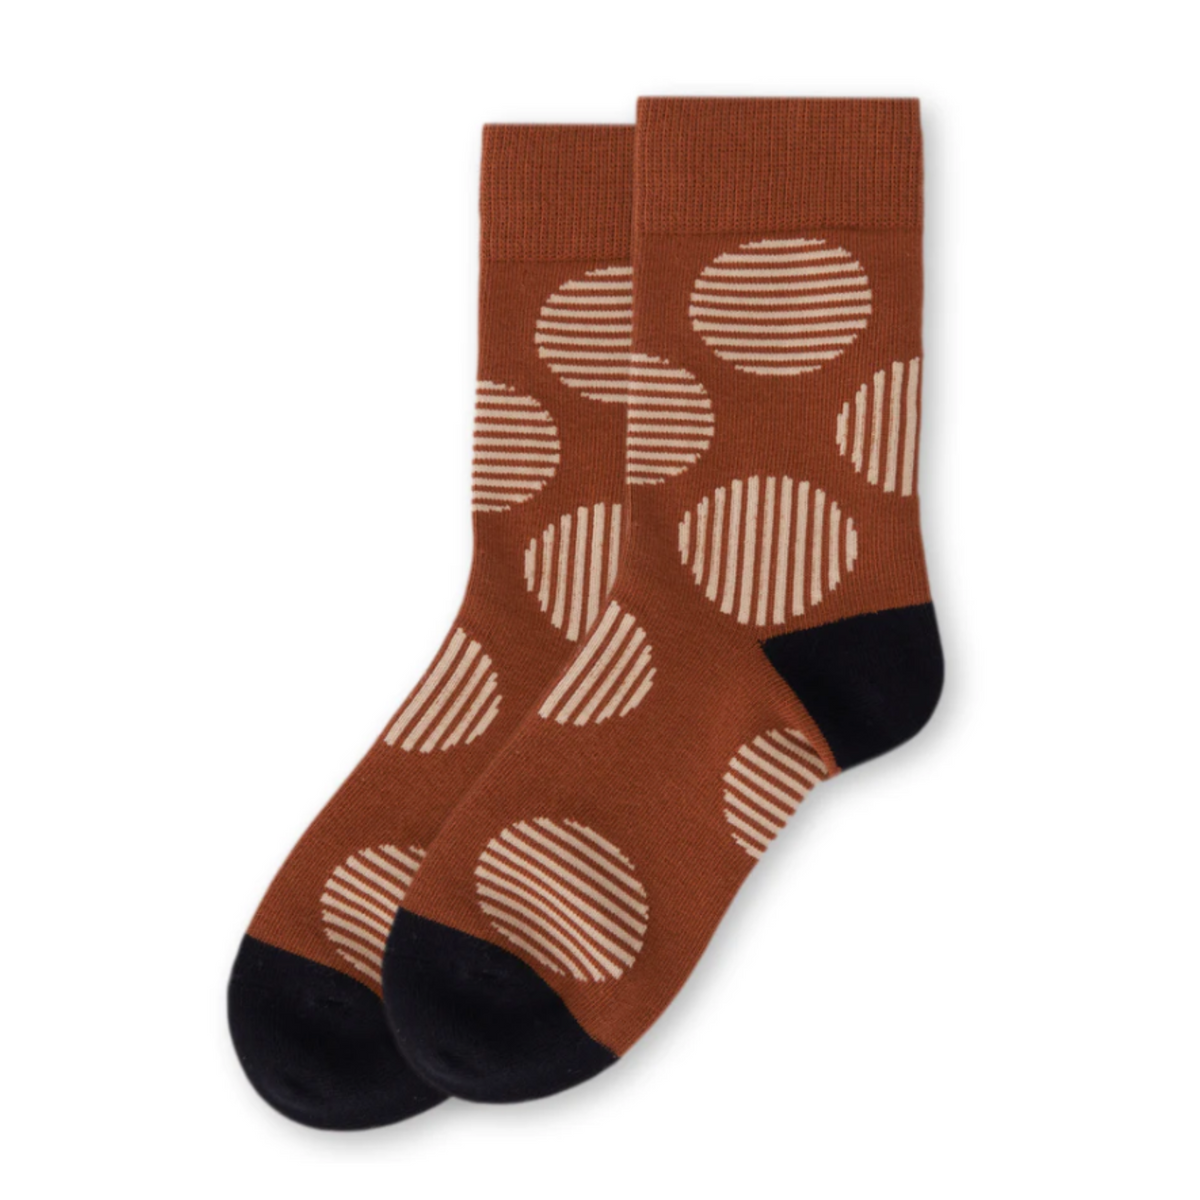 MeMoi Retro Circle women&#39;s Crew sock featuring brown sock with beige stripes in circle patterns all over. Socks shown on display laying flat.